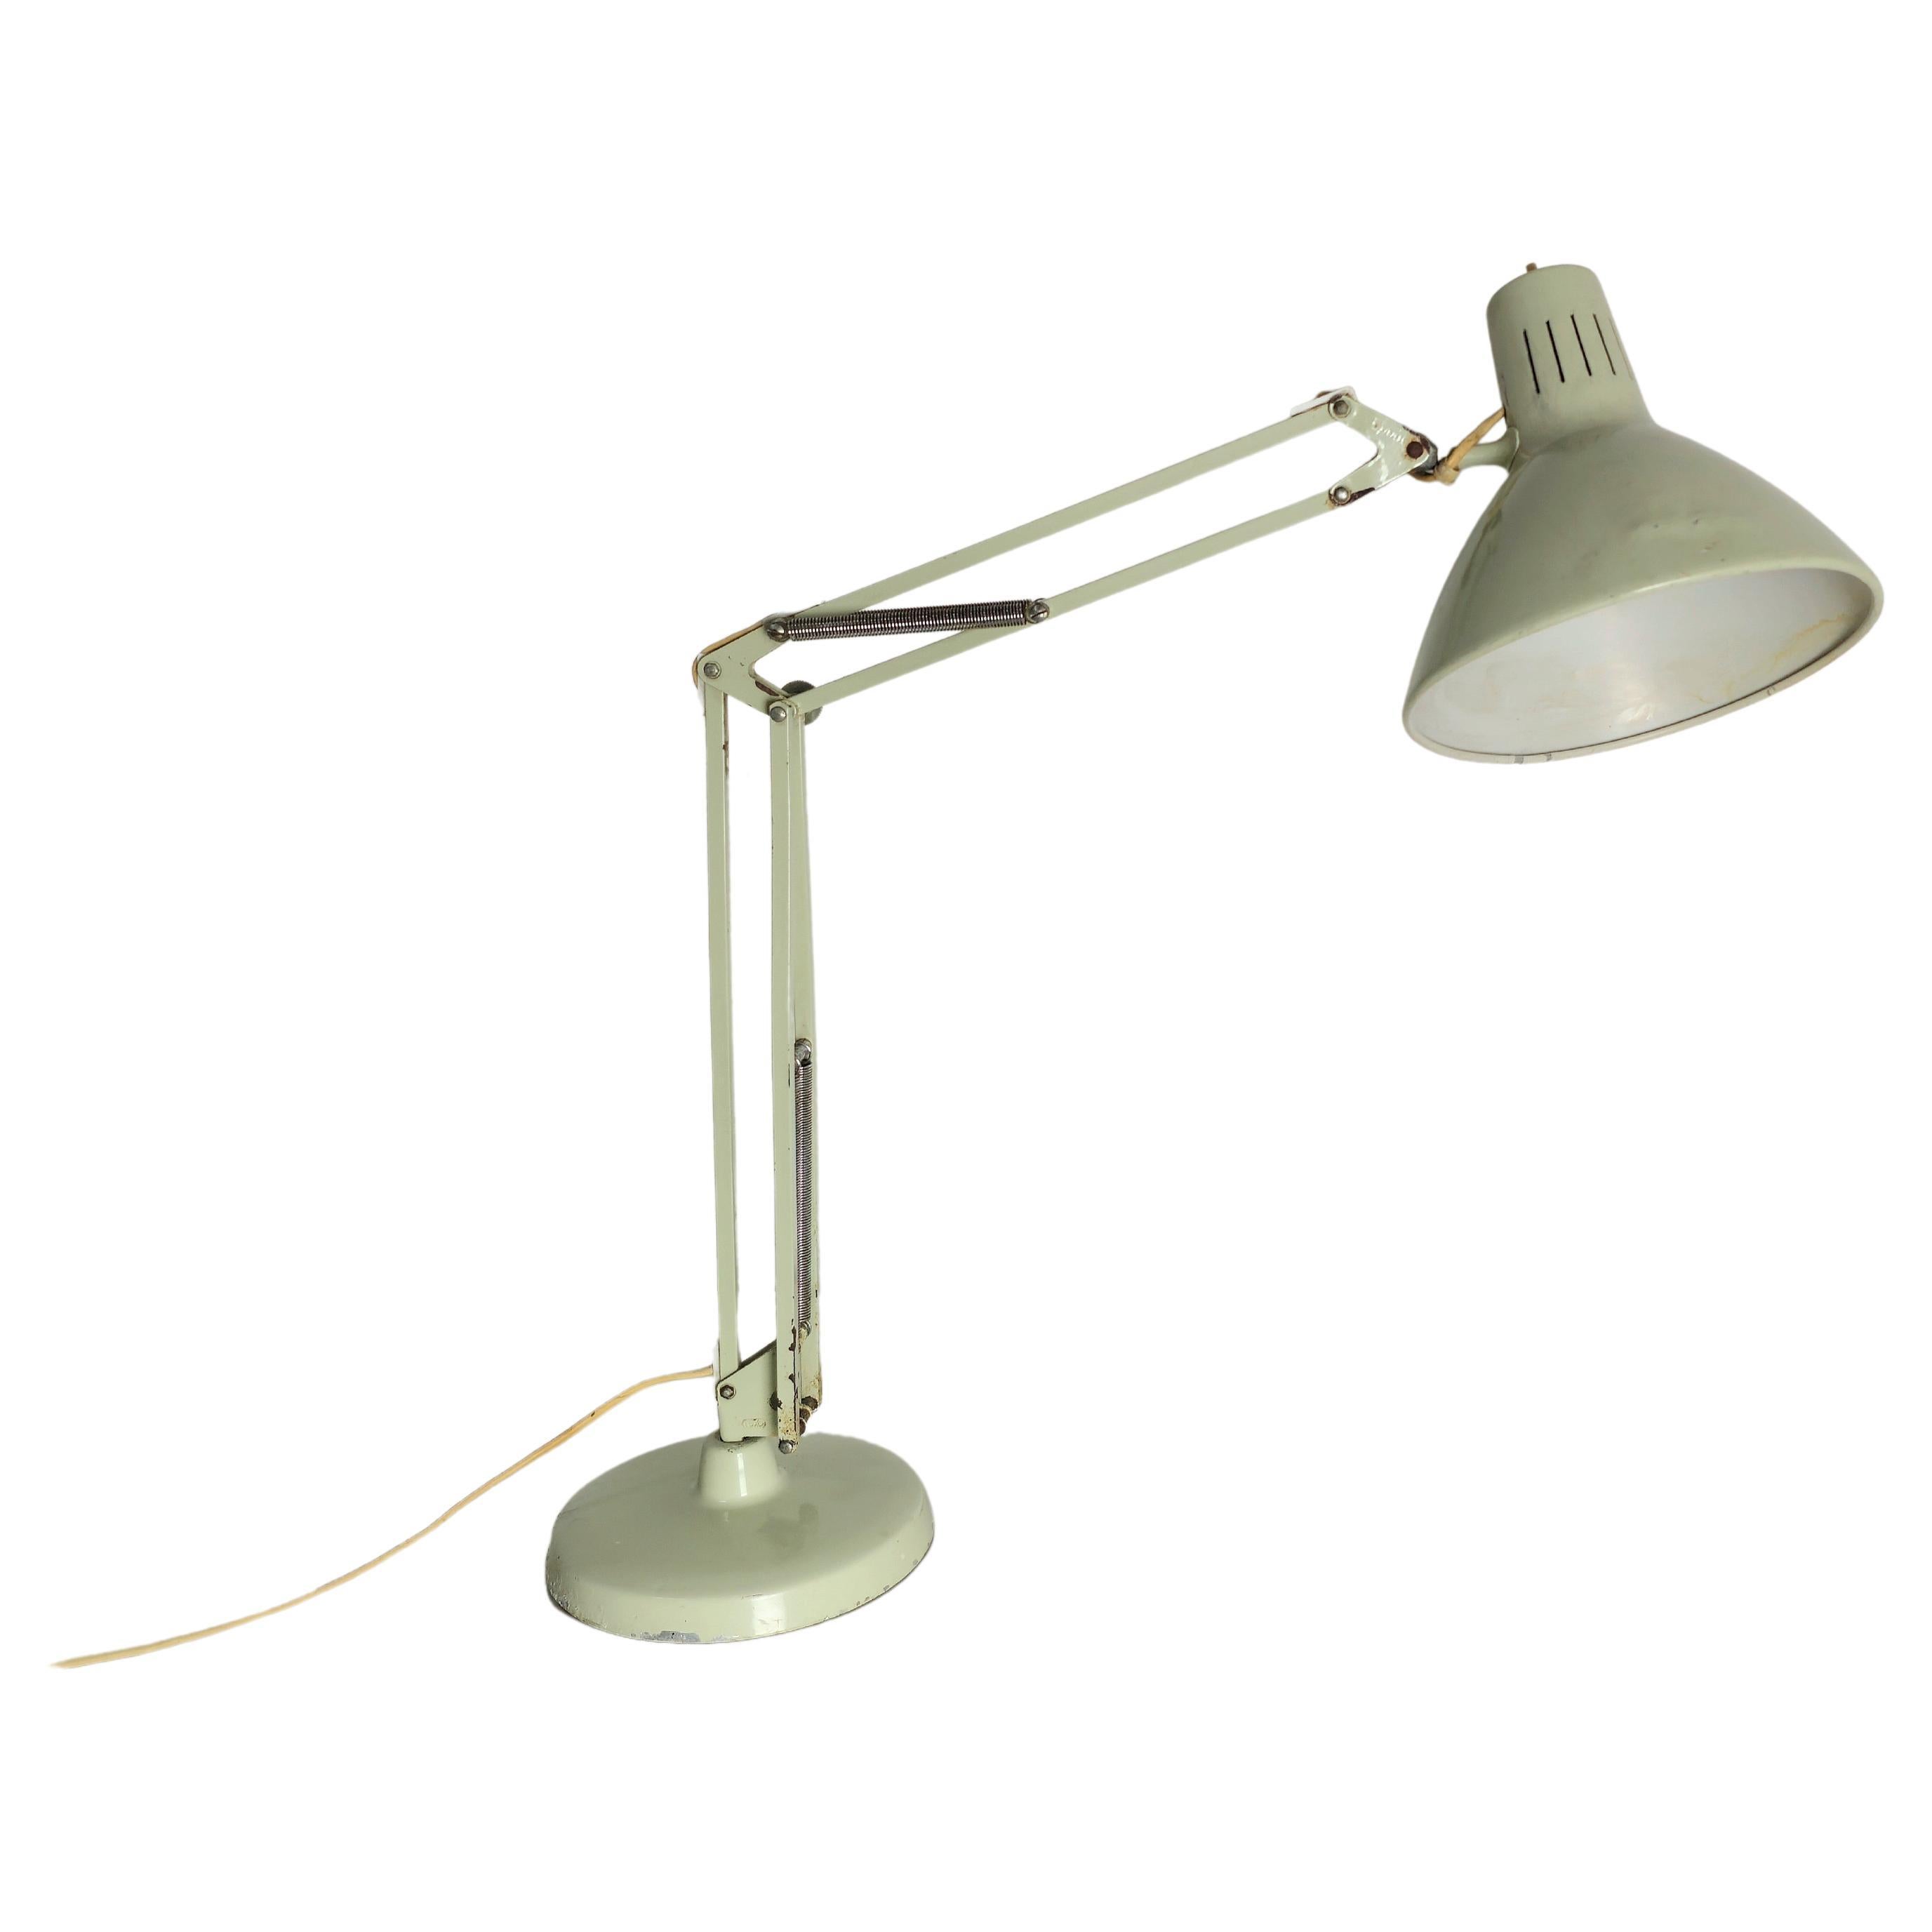 Table lamp with 1 E27 light designed by the Norwegian designer Jac Jacobsen and produced in the 50s by his company called Luxo. The lamp was made with a circular base and an extendable mechanism in enamelled metal and an adjustable conical diffuser